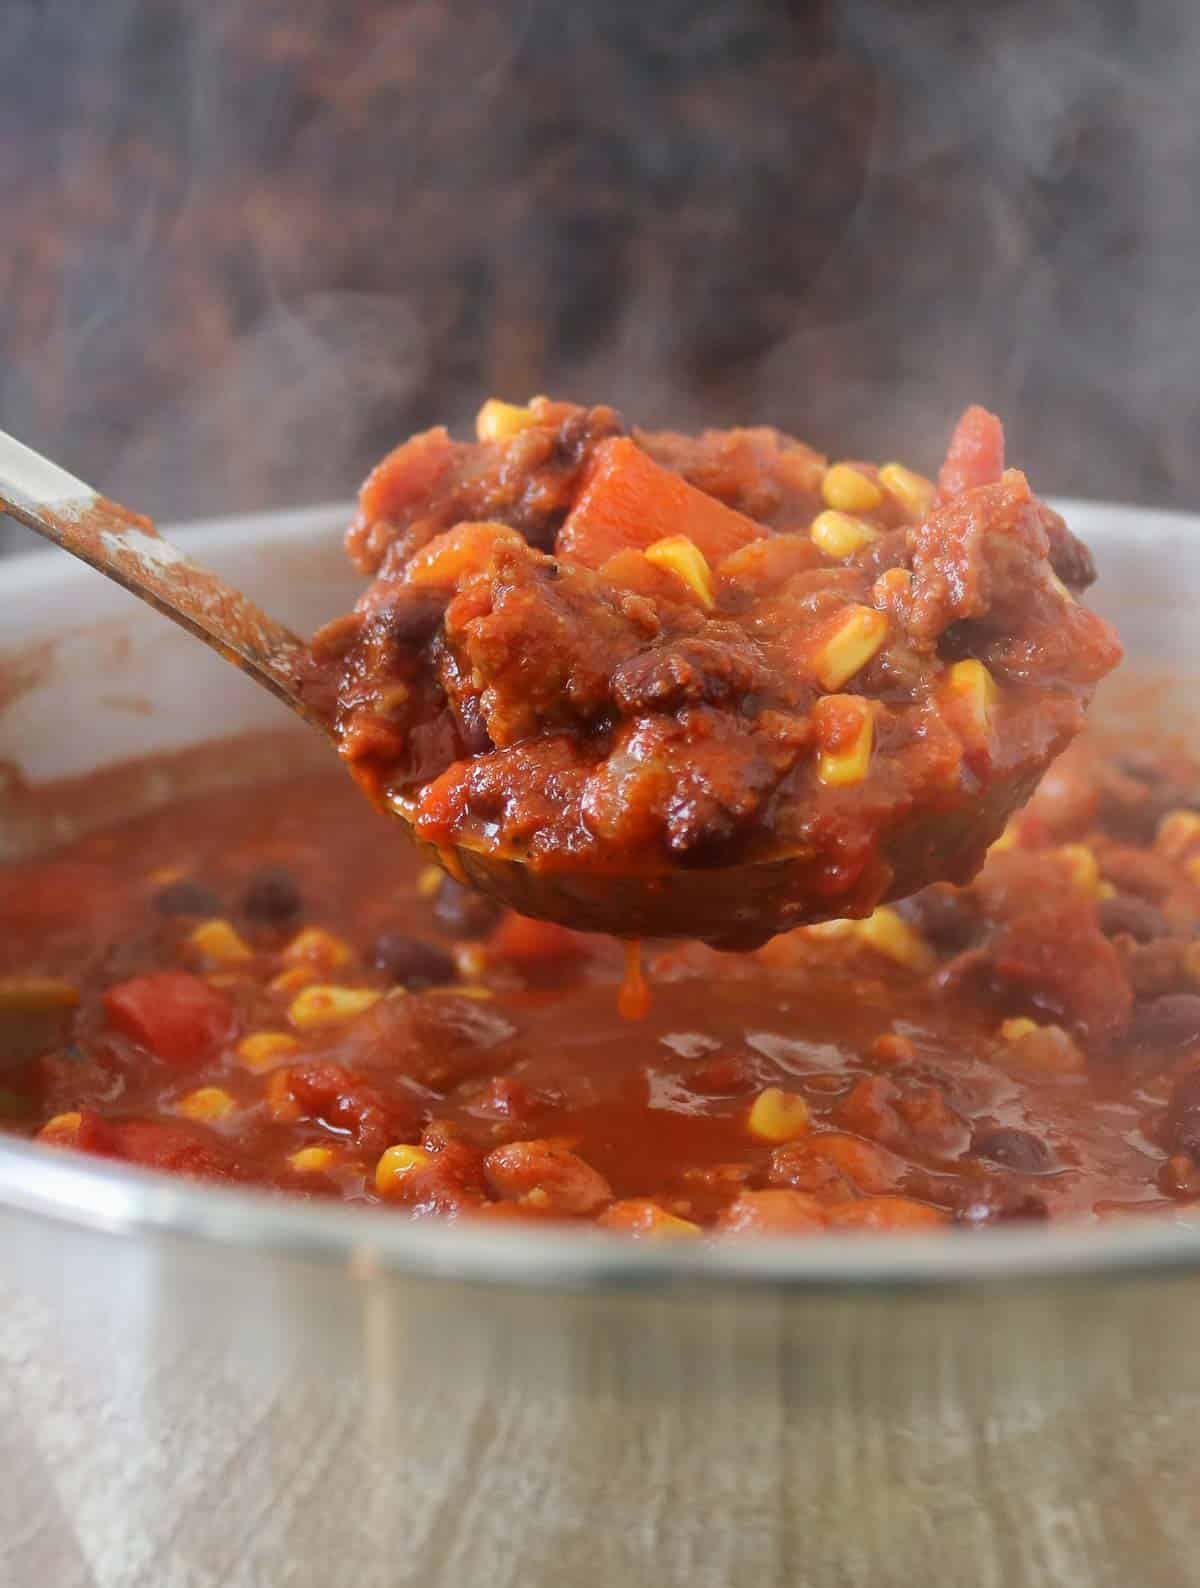 Steaming ladle of chili from a pot.